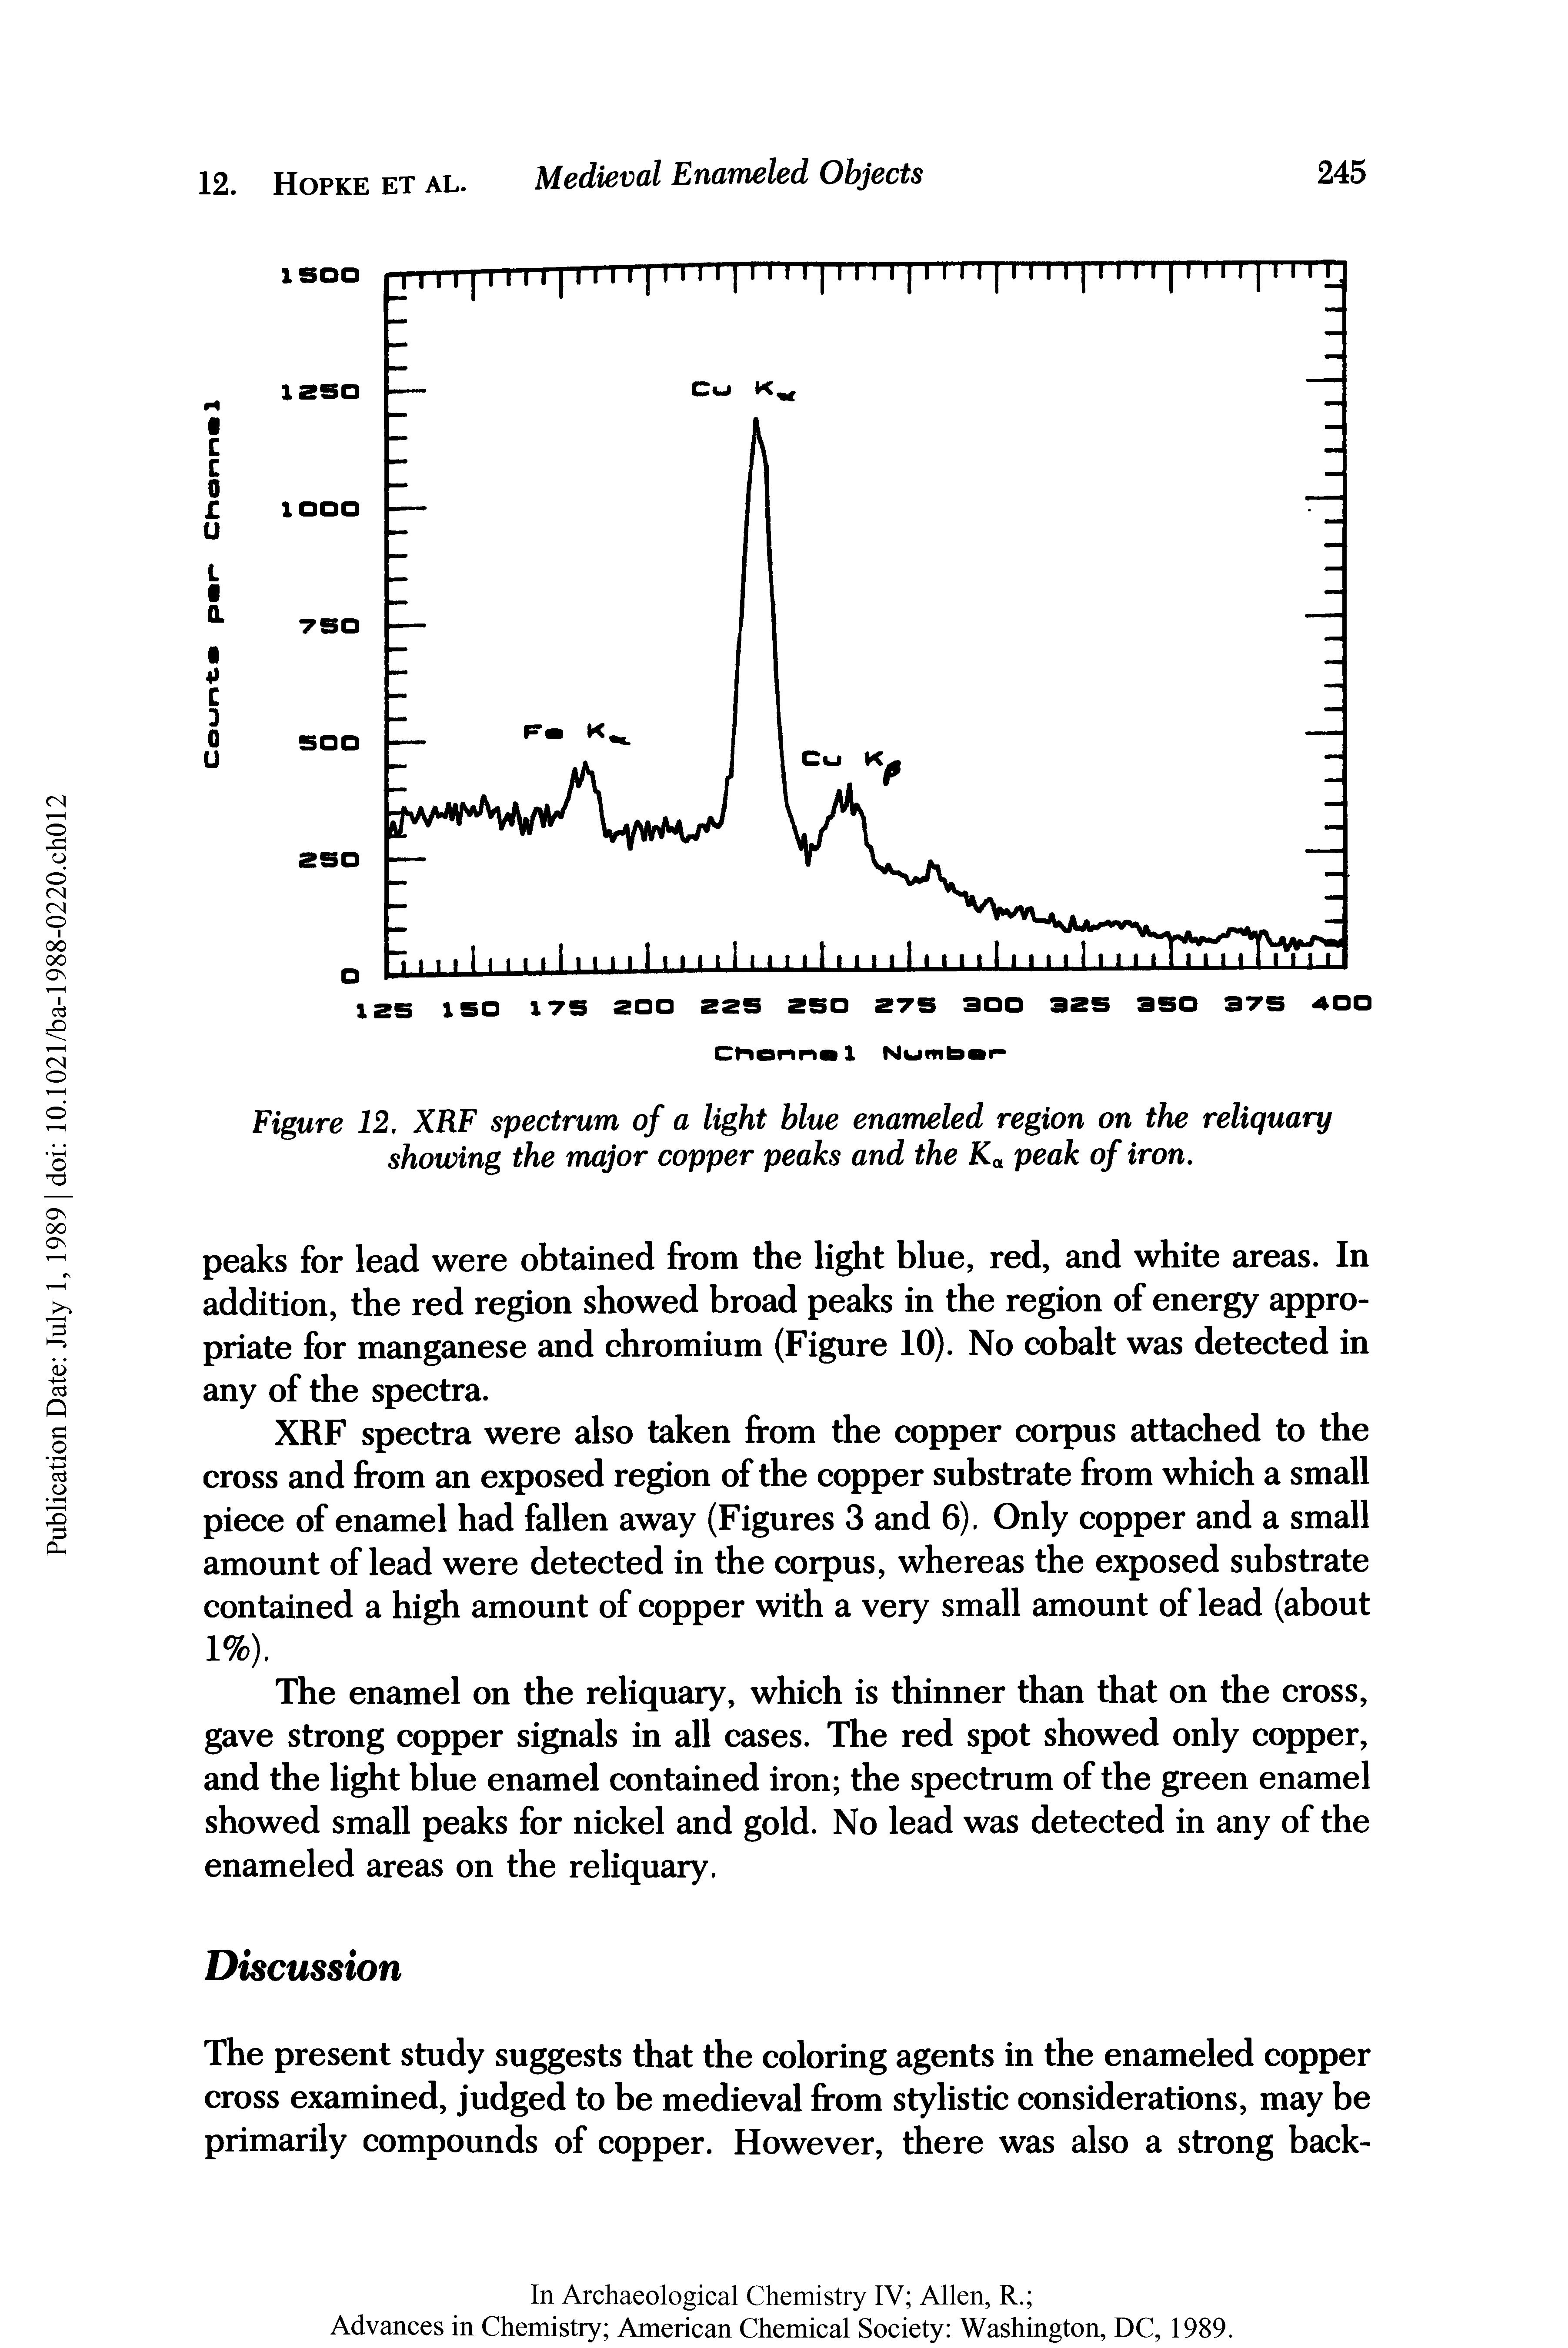 Figure 12, XRF spectrum of a light blue enameled region on the reliquary showing the major copper peaks and the Ka peak of iron.